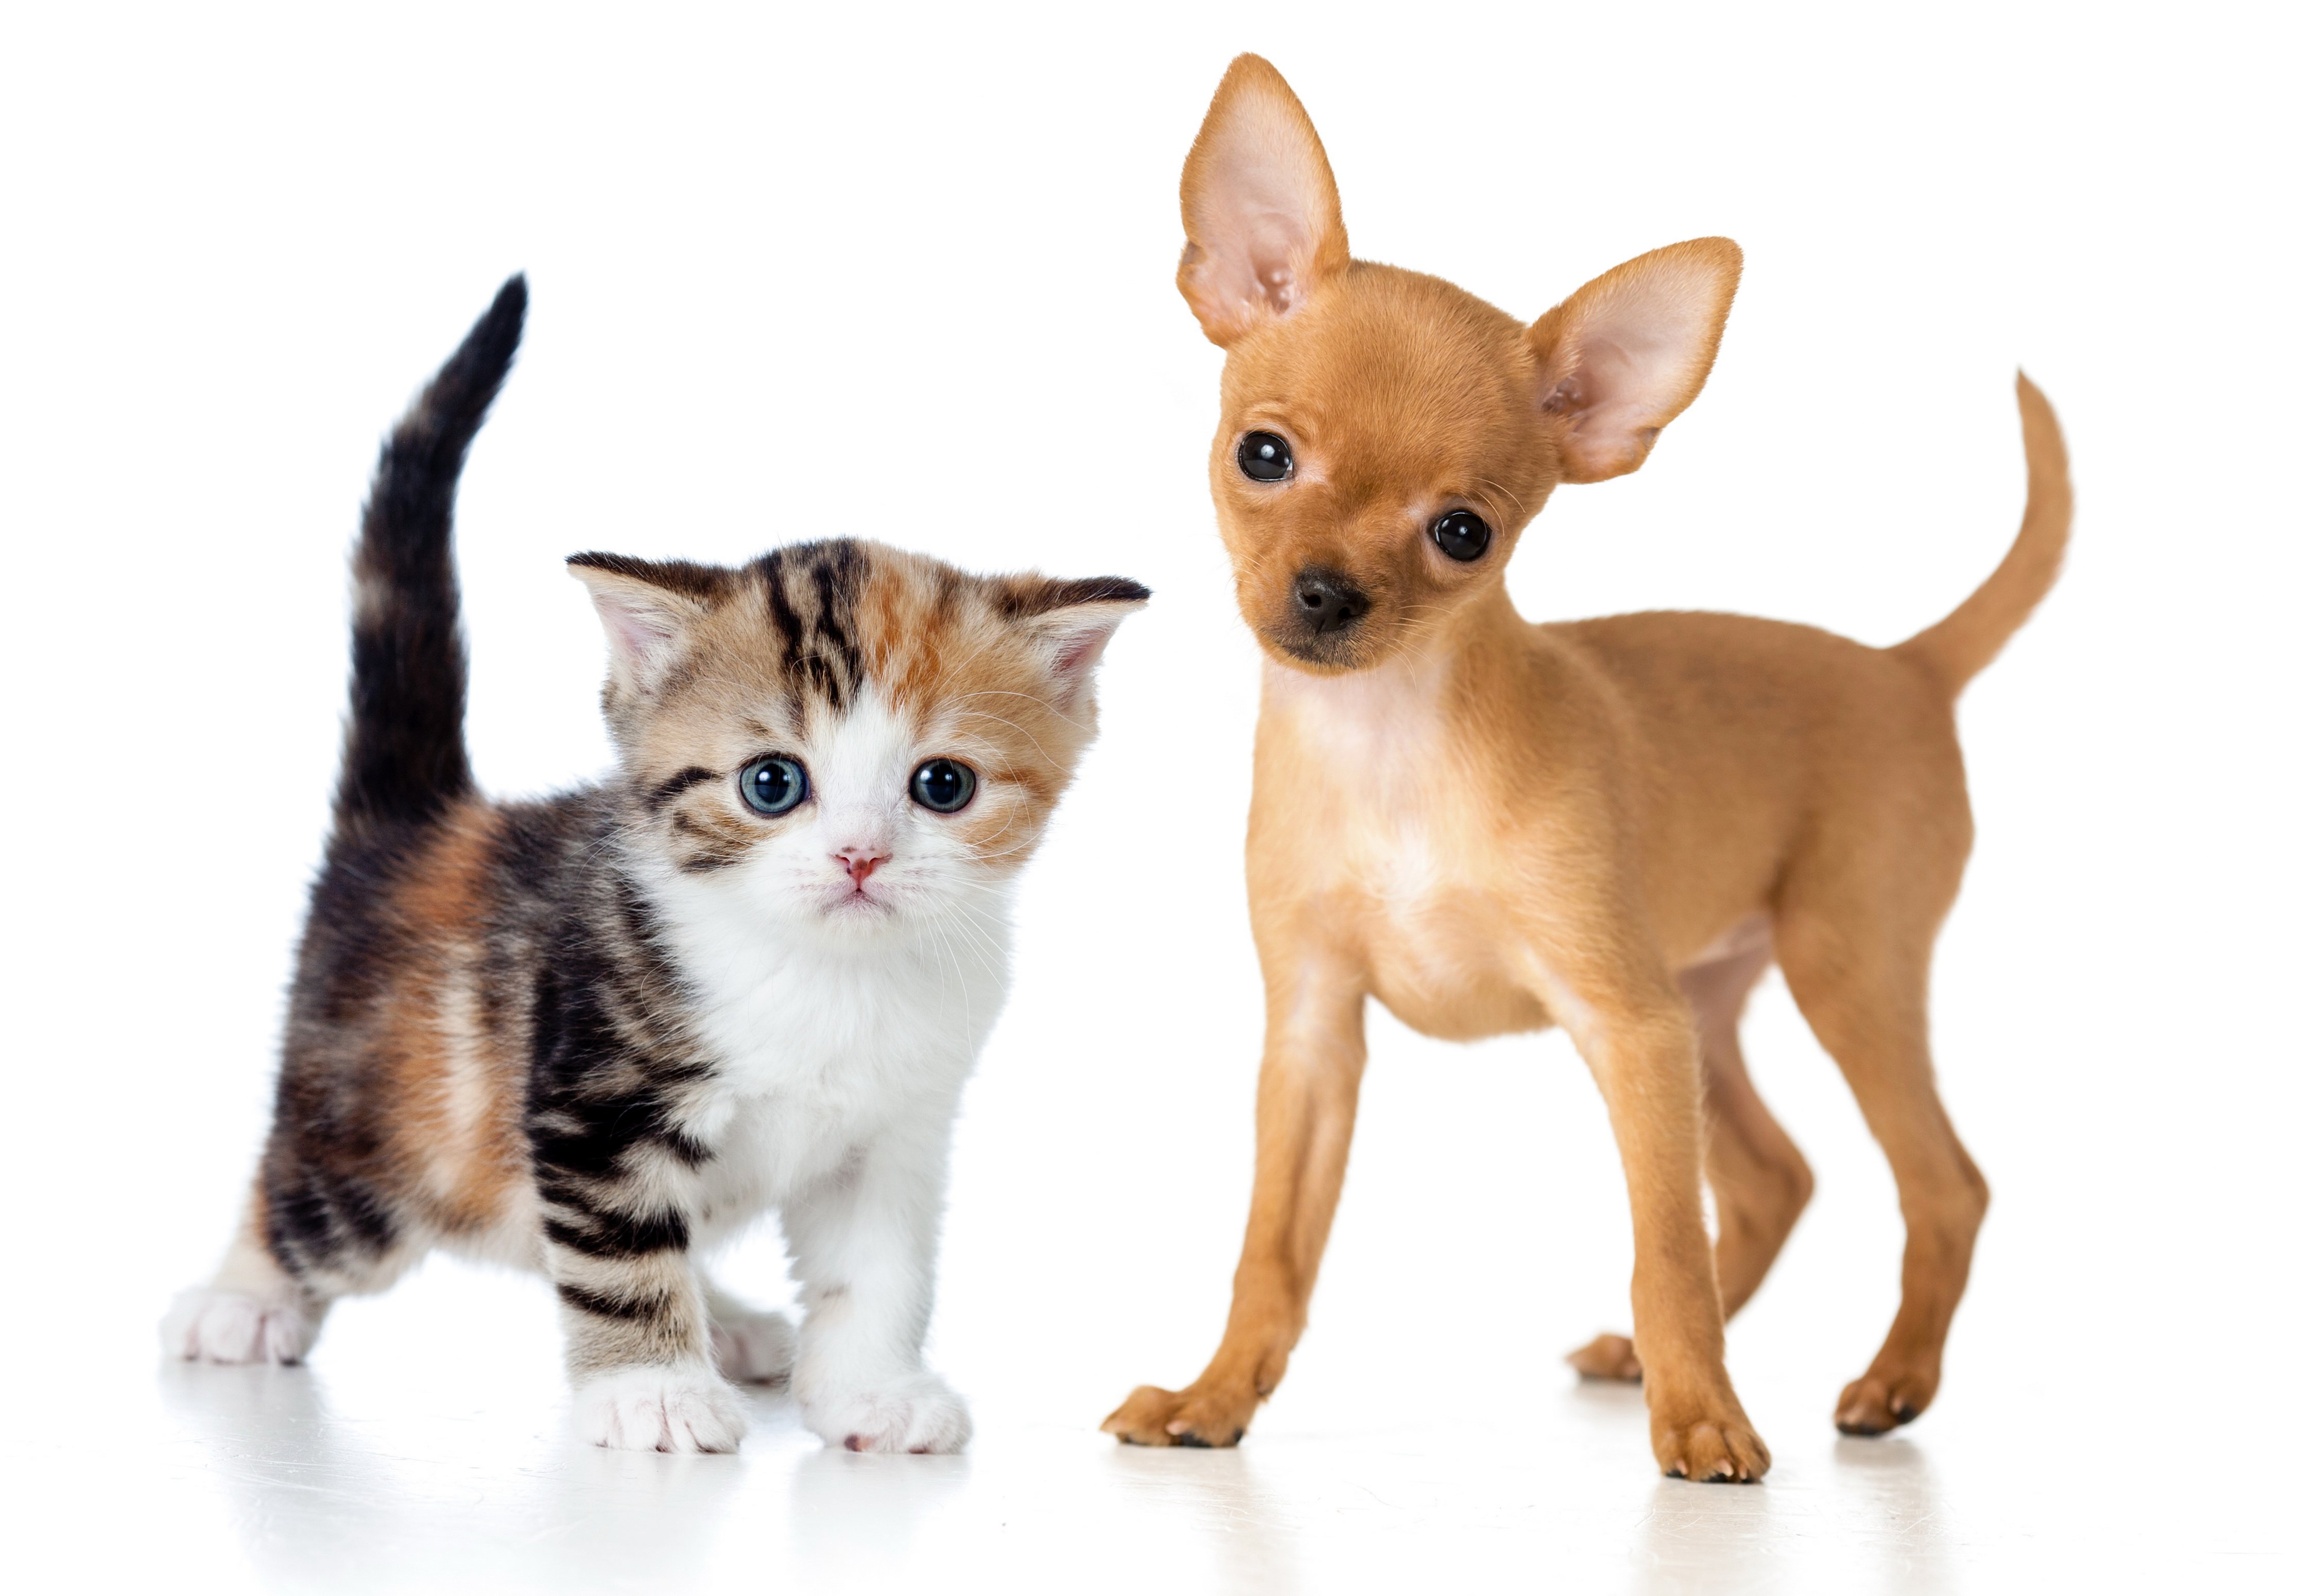  dogs  Cats  Two Kitten Puppy Chihuahua Animals Baby  